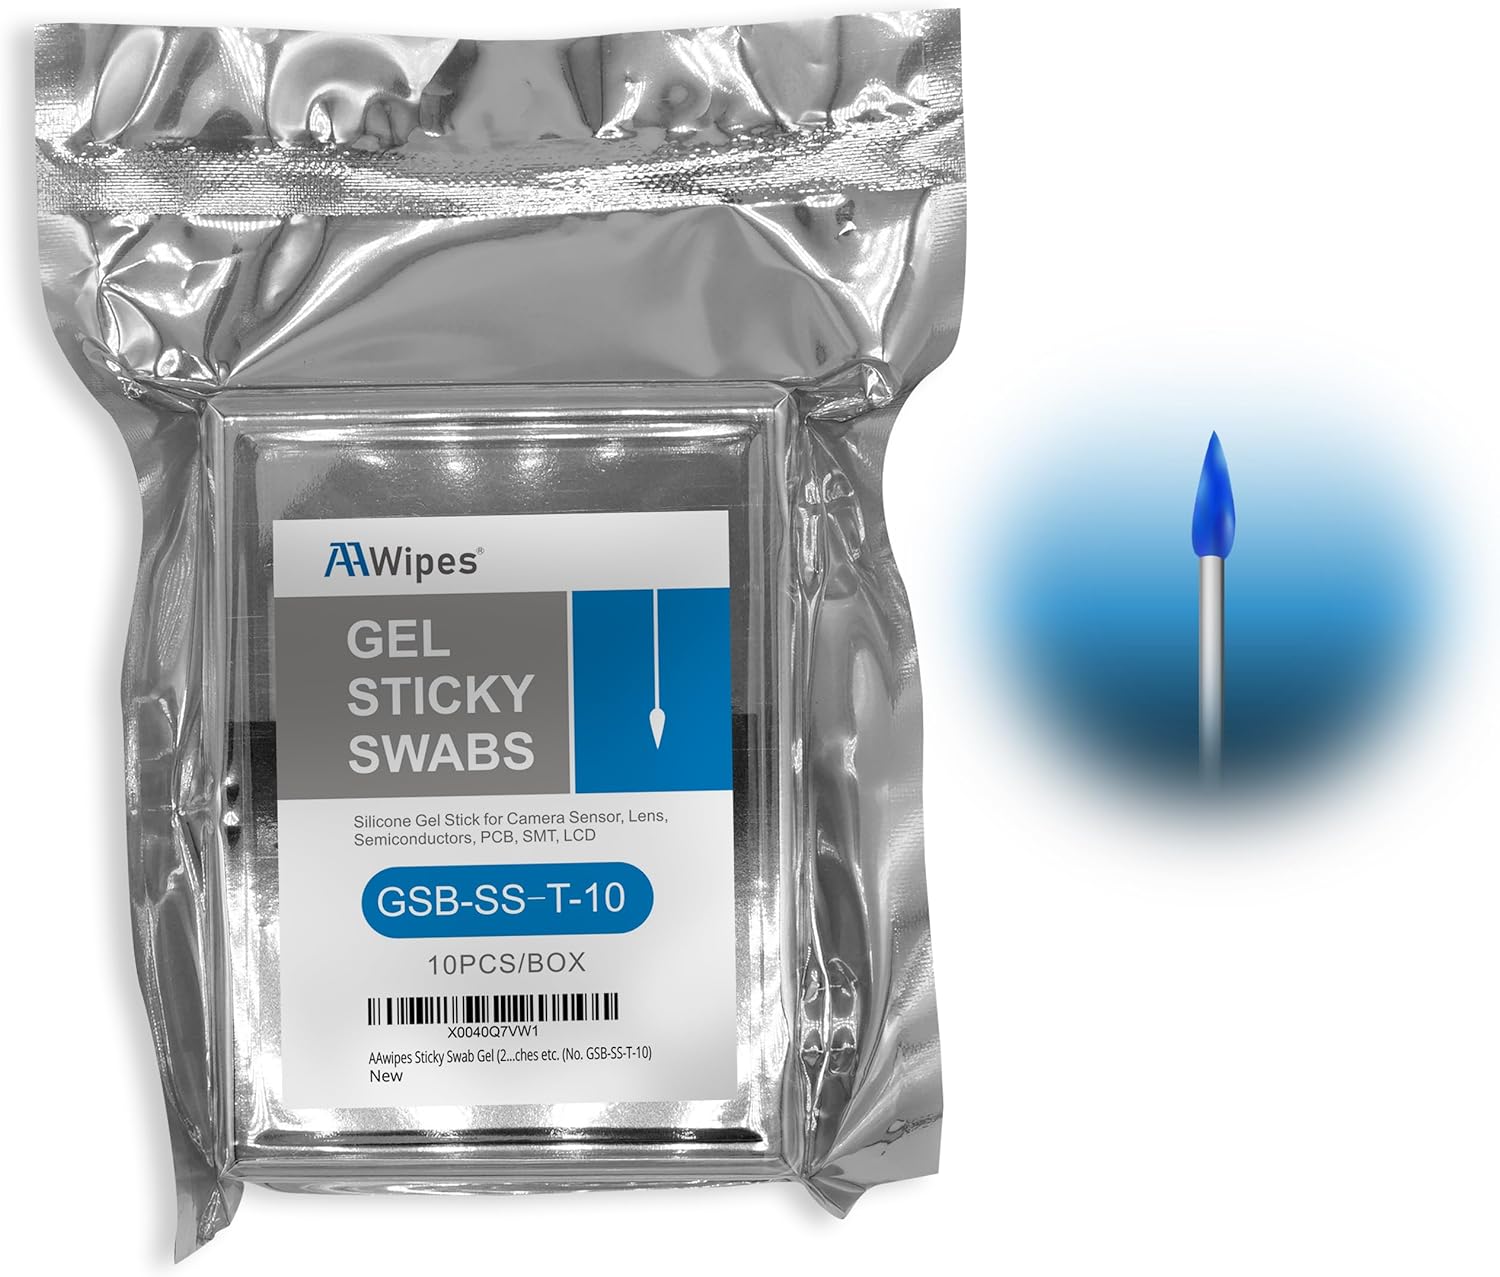 AAwipes Sticky Swab Gel (2.0 mm/0.08 inch Tipped Head, 100Packs Blue) Sticky Pen Silicone Gel Stick for Camera Sensors, LCD, Semiconductors, PCB, SMT & Watches etc. (No. GSB-SS-T-100)